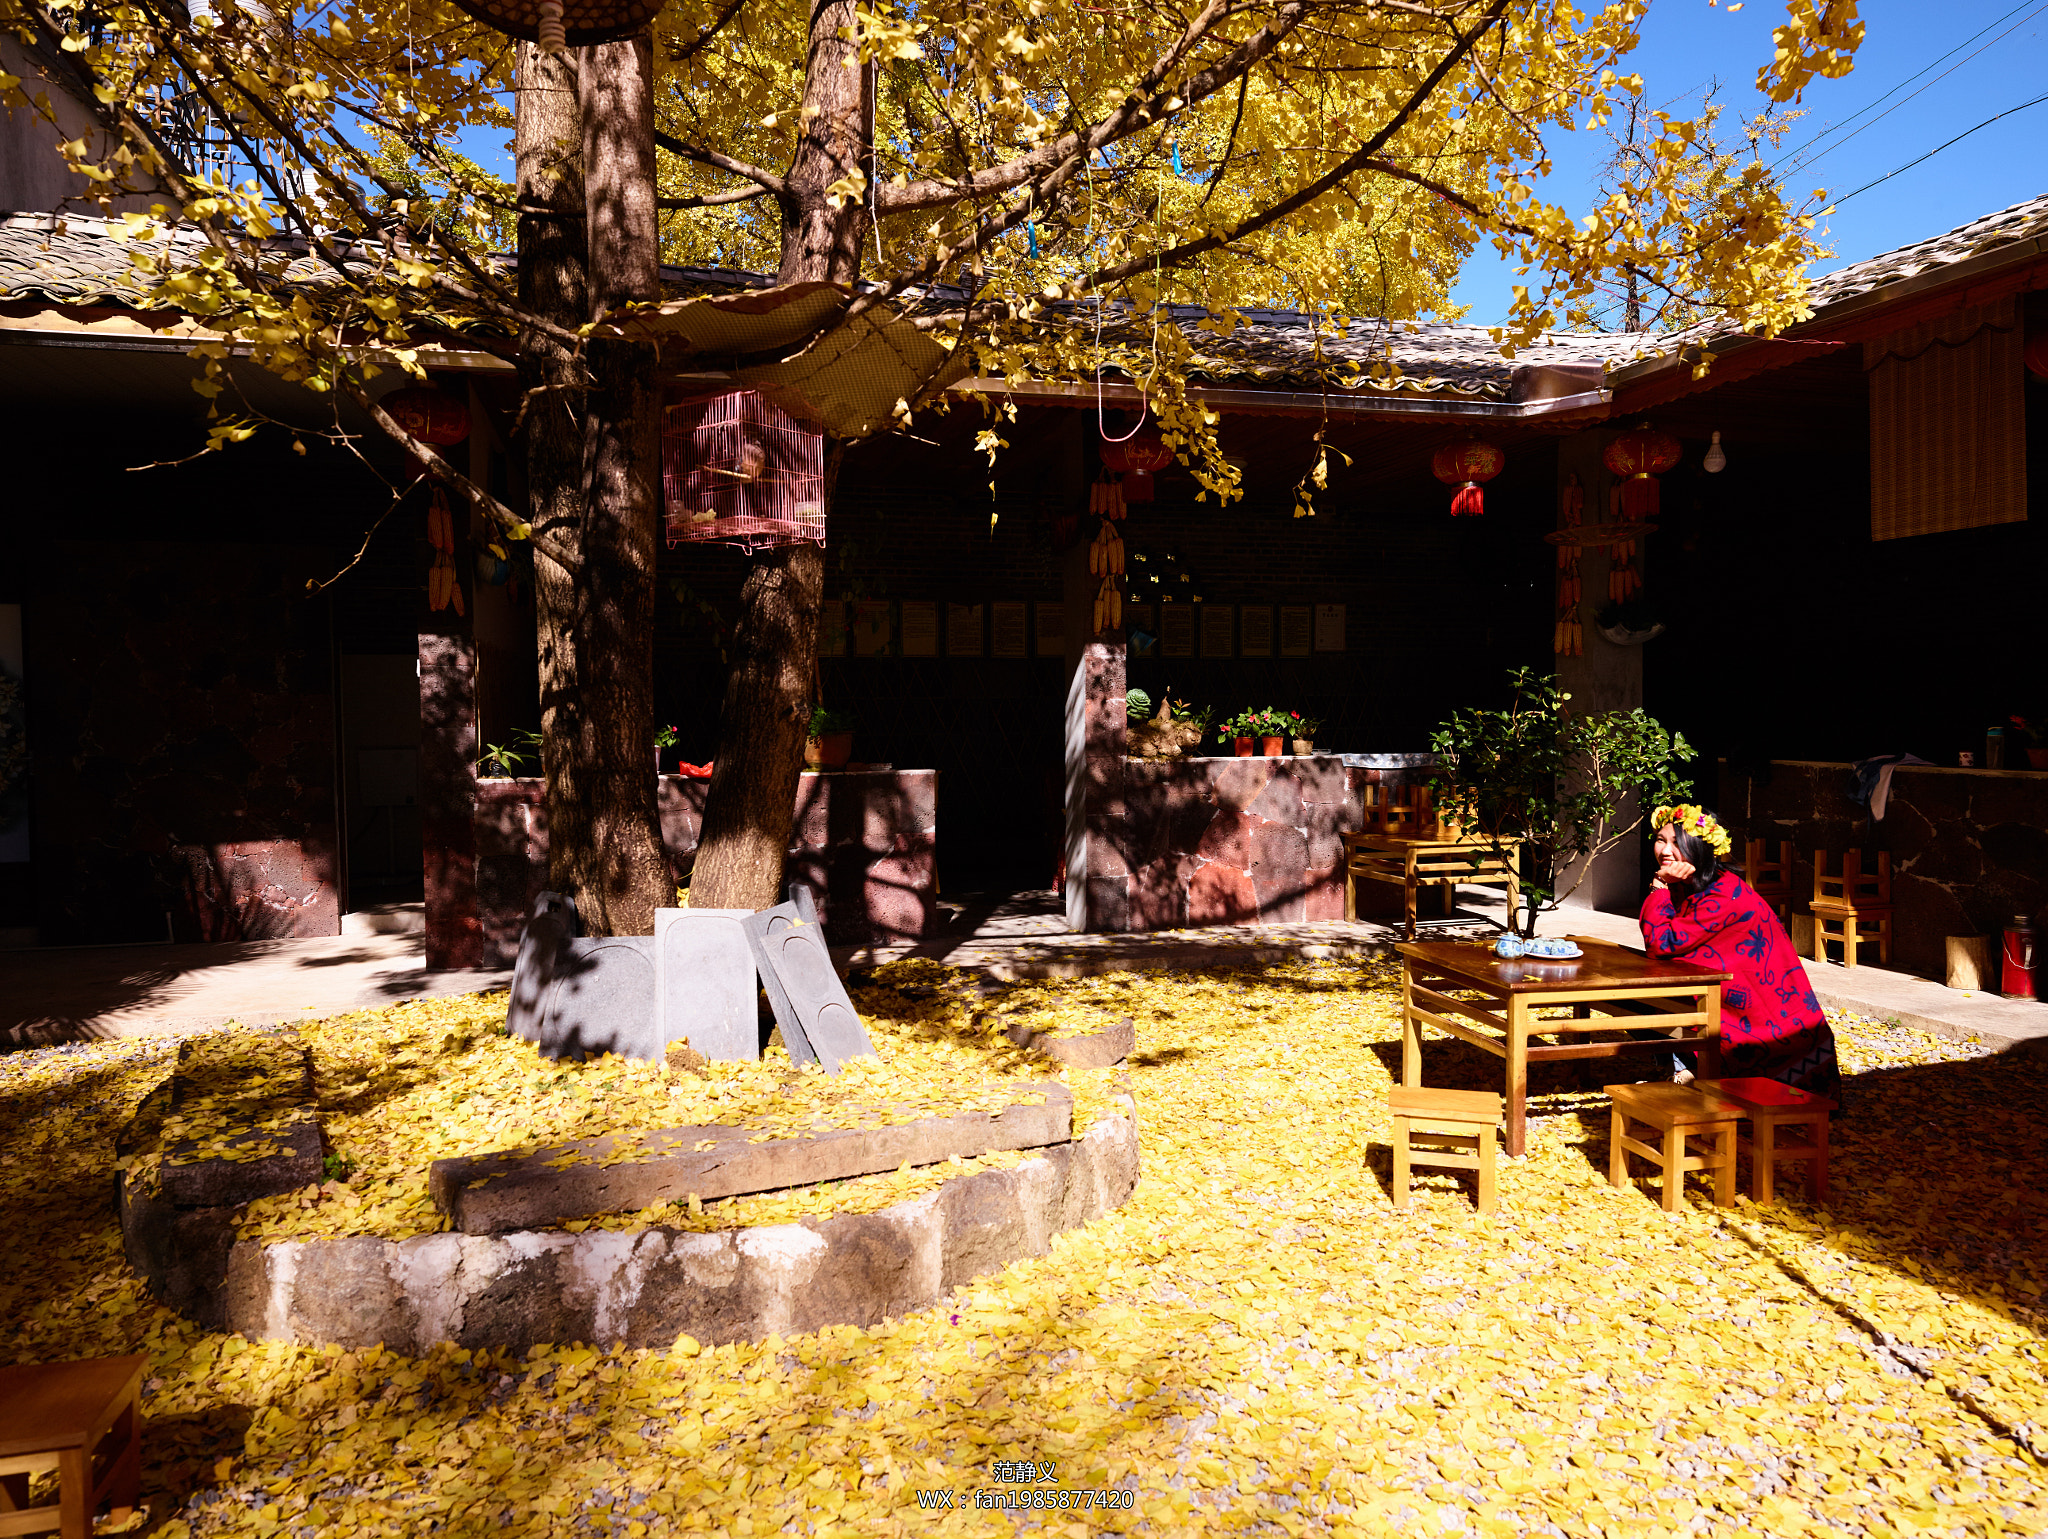 Phase One IQ3 80MP sample photo. Ginkgo village in yunnan province photography